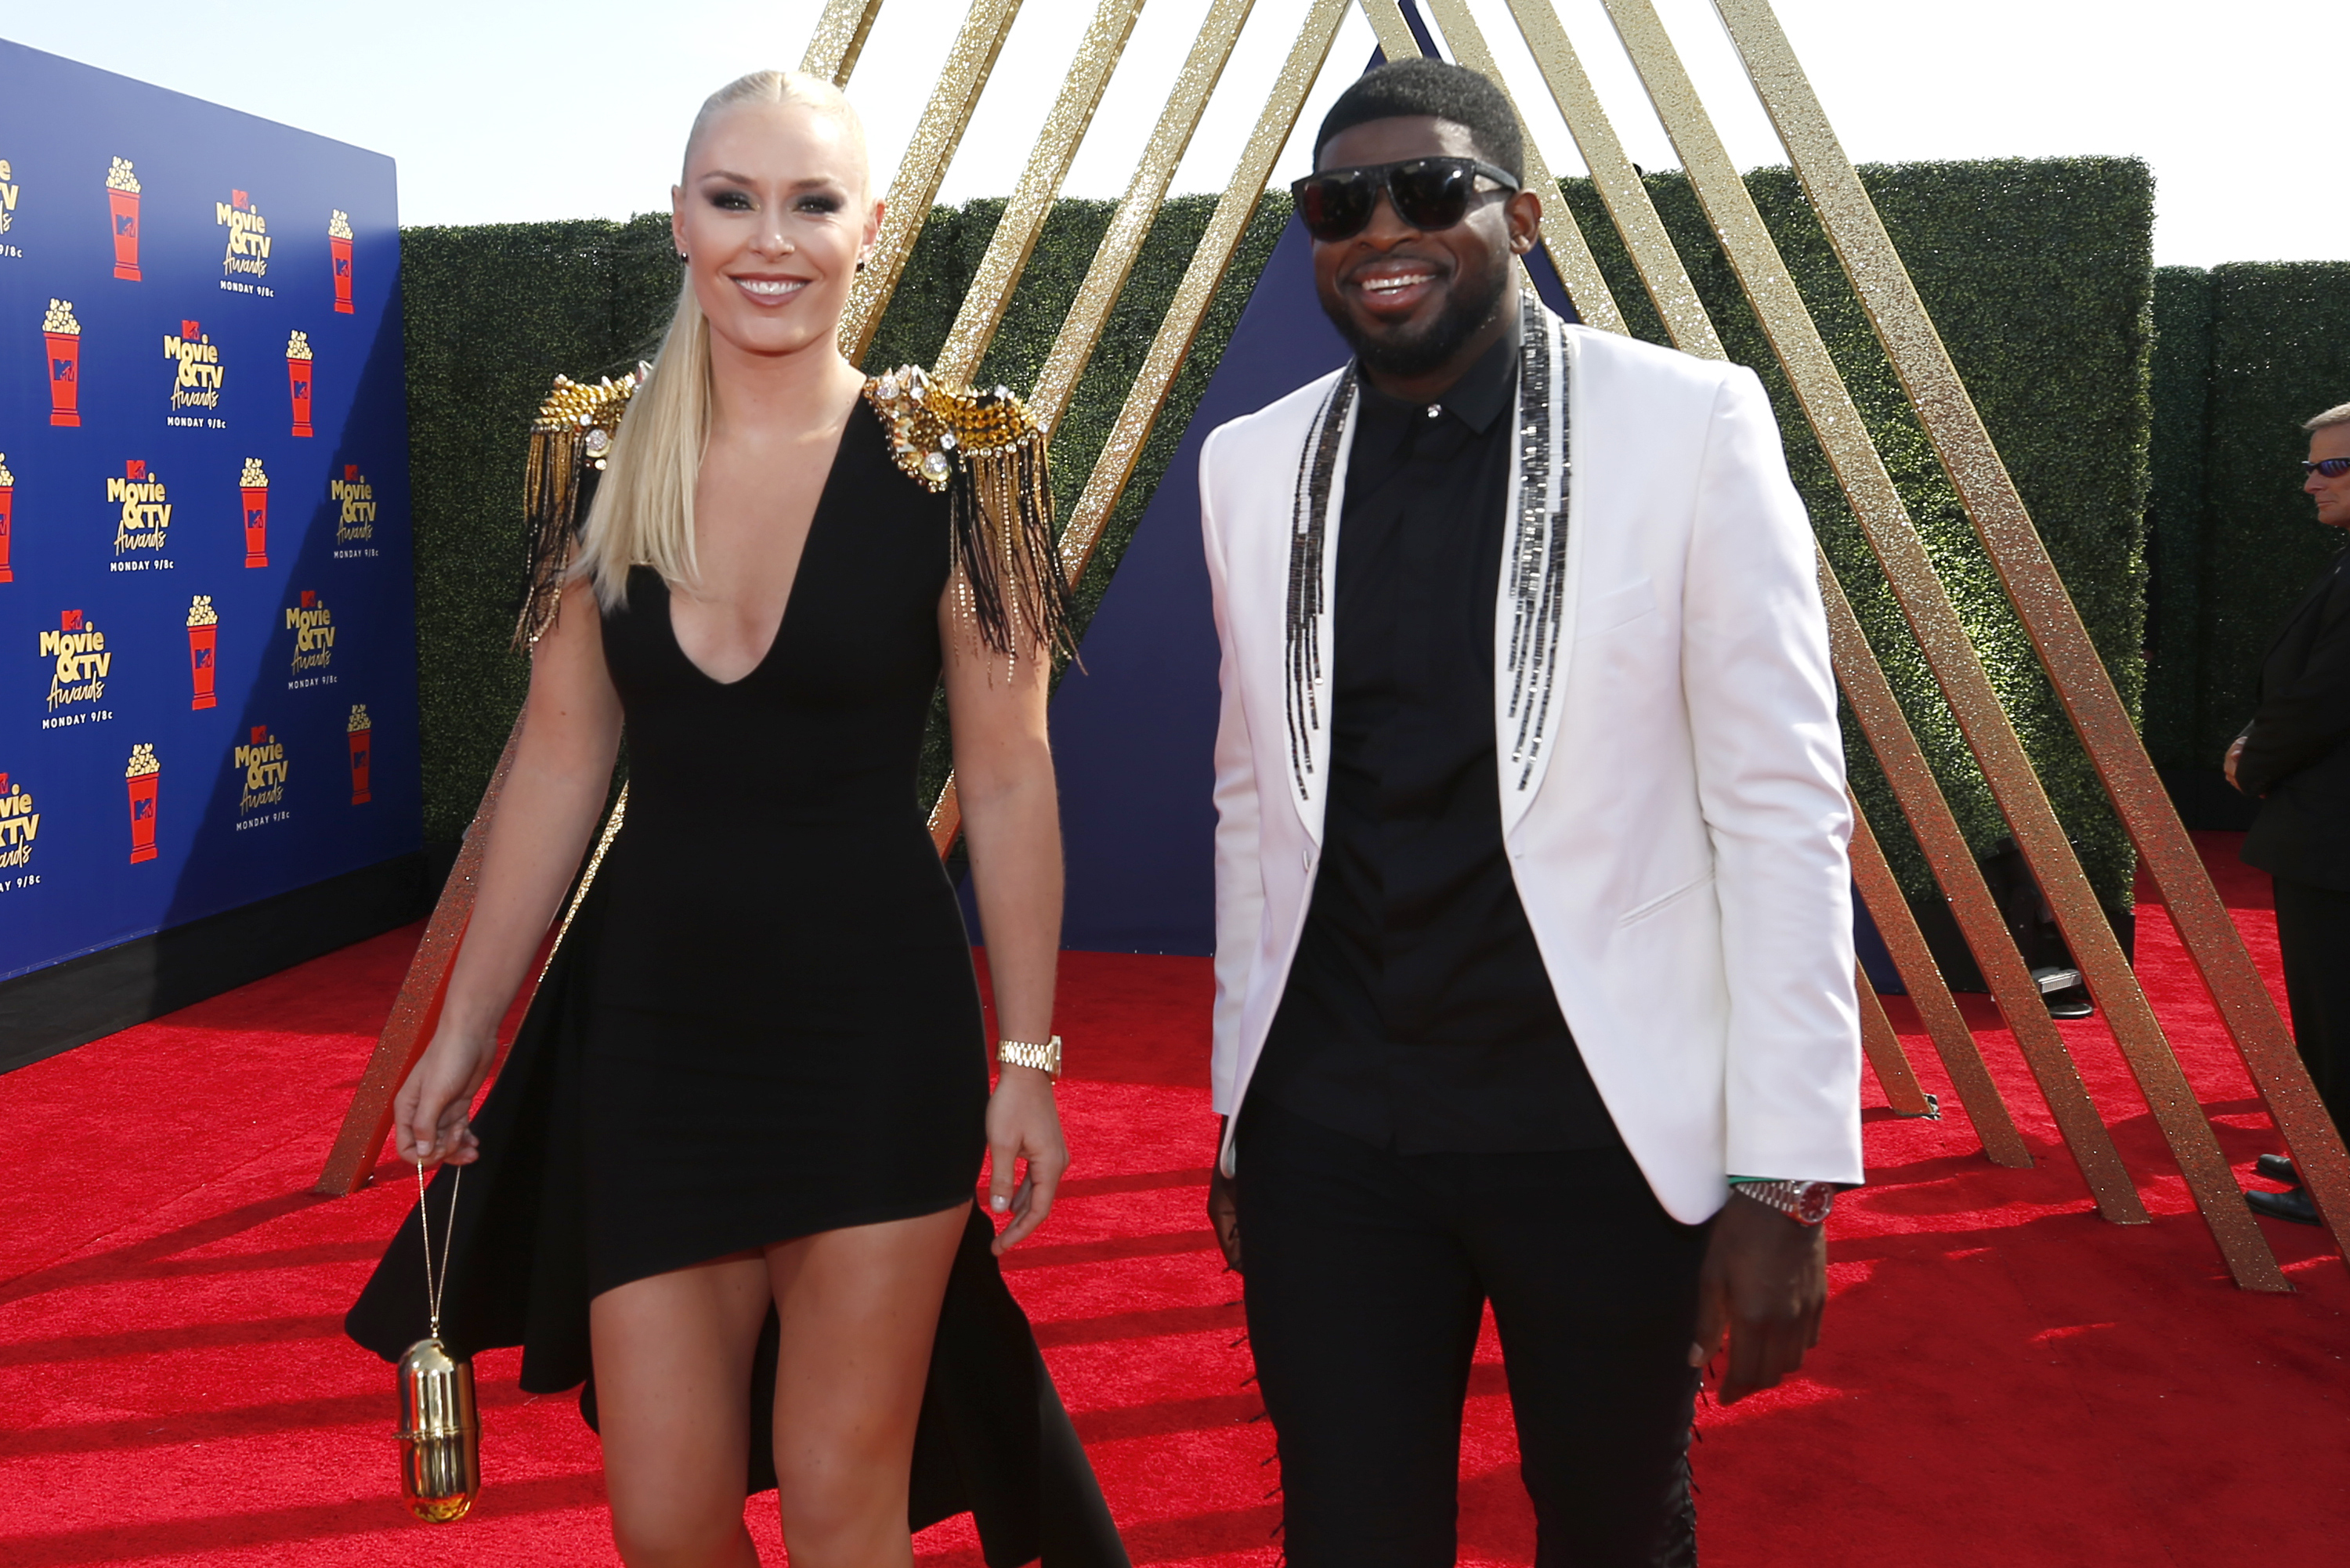 PK Subban and Lindsey Vonn are engaged 💍